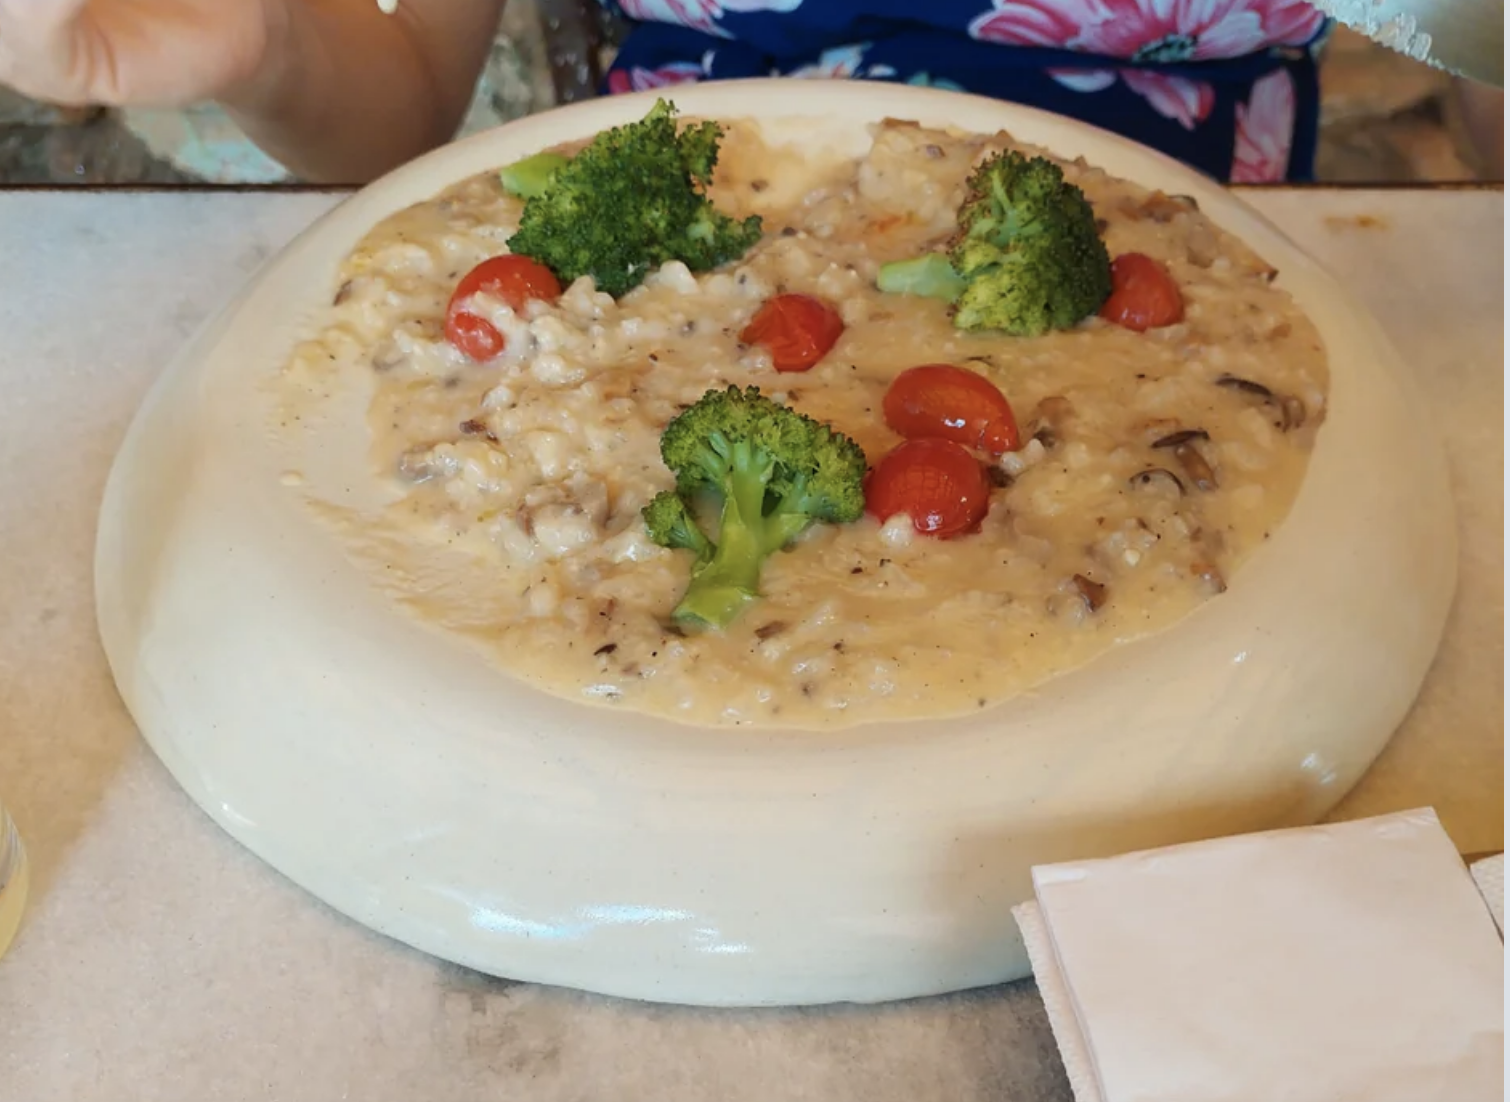 An upside down plate with food on it